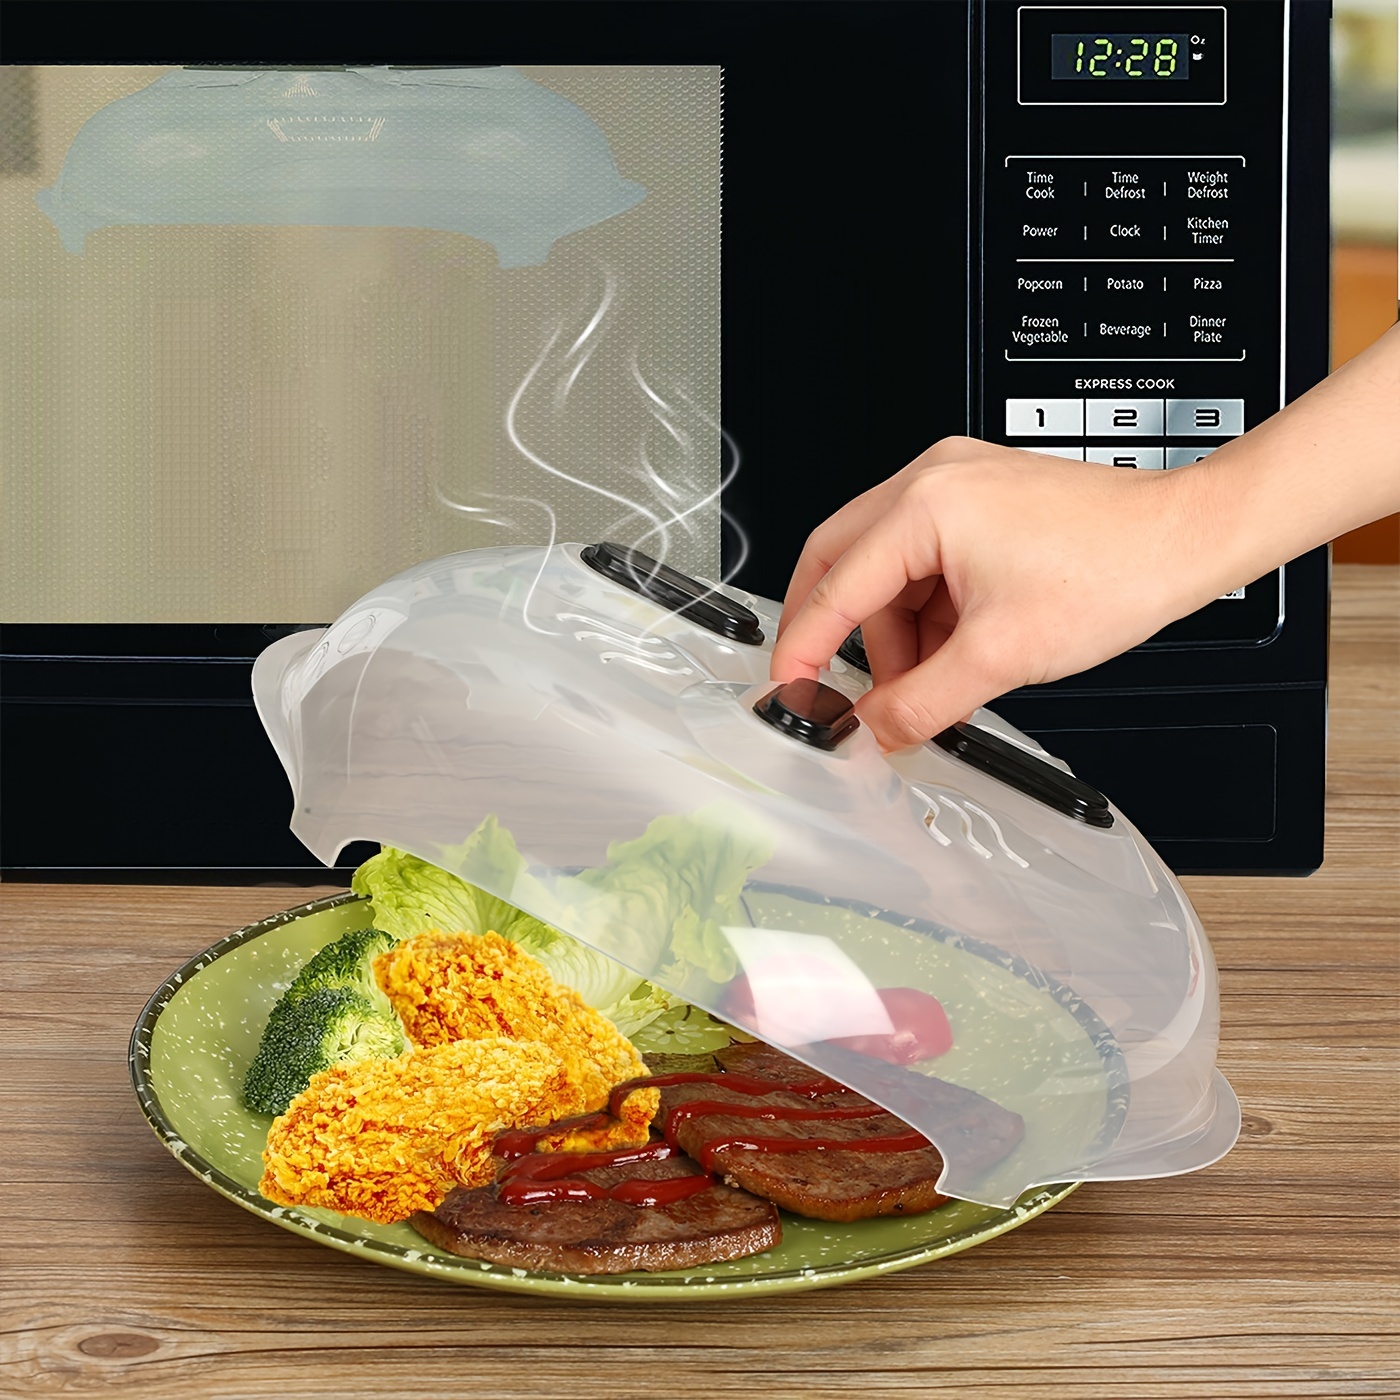 Microwave Cover for Food,1PC Microwave Splatter Cover BPA Free with Handle  and Adjustable Steam Vents Holes, Microwave Food Cover Steam Vents Keeps